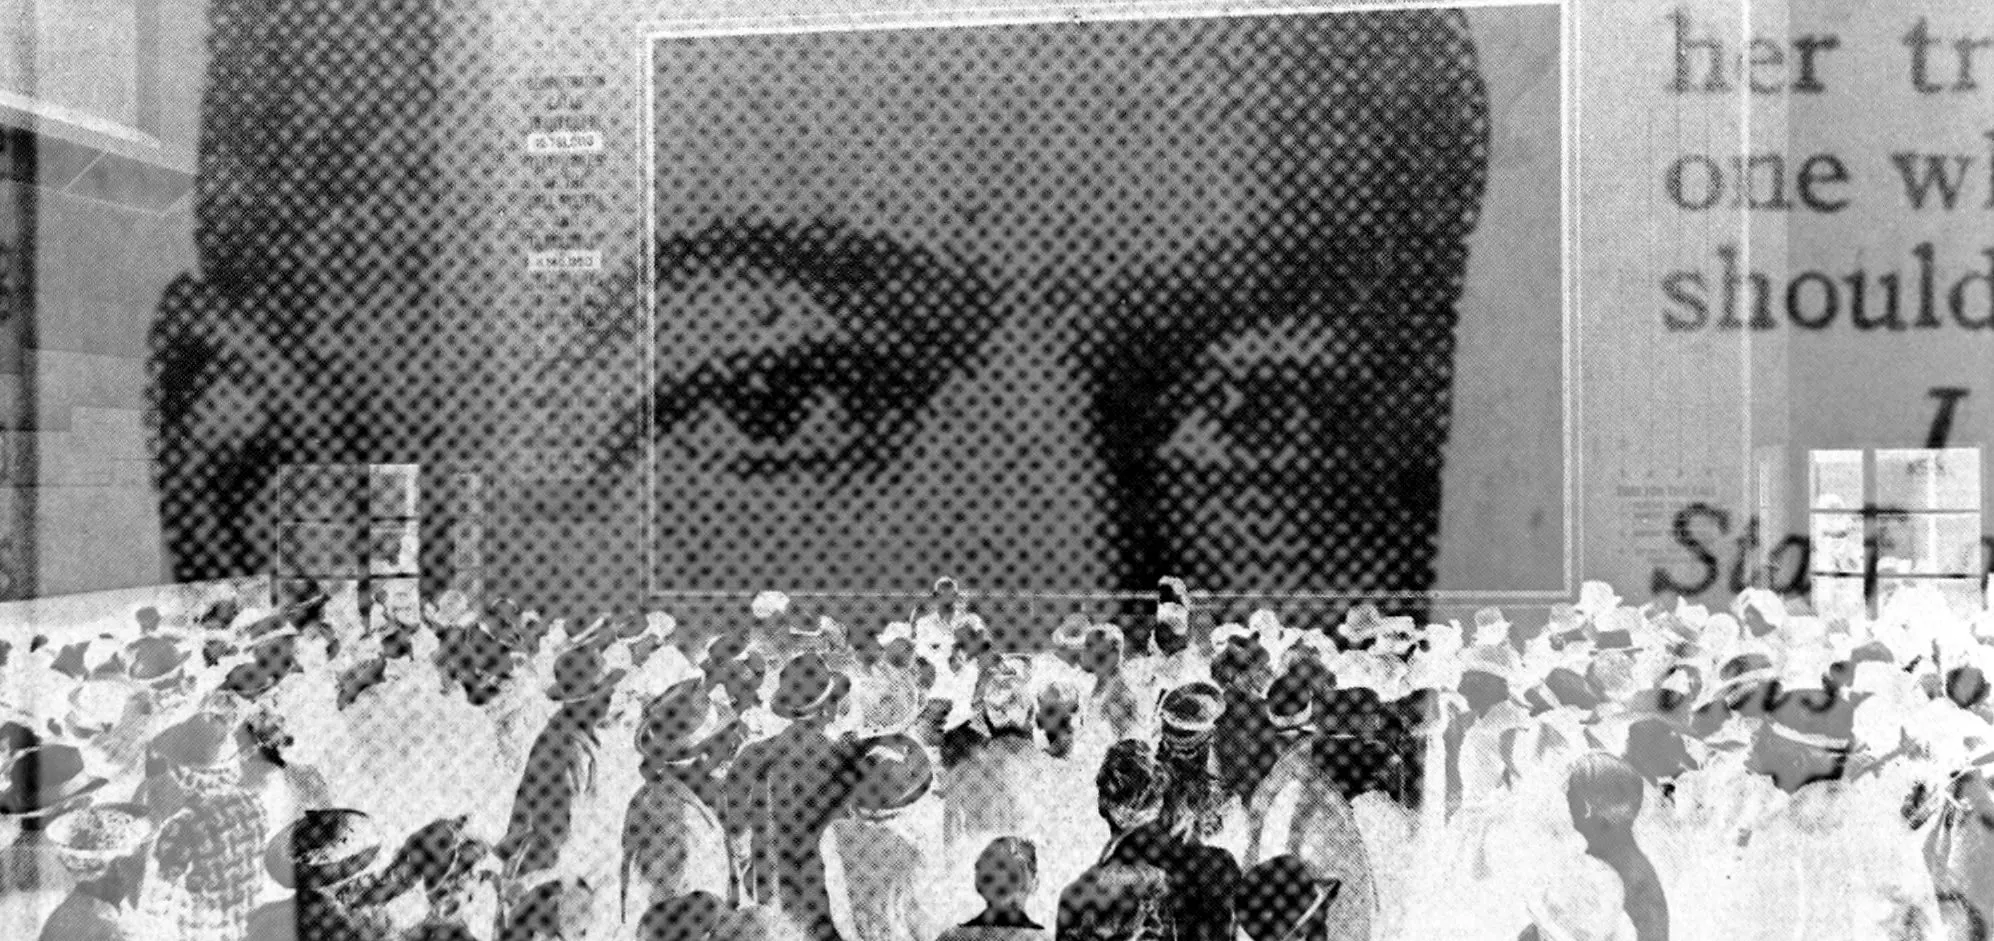 Black and white composed image of a man looking over a crowd